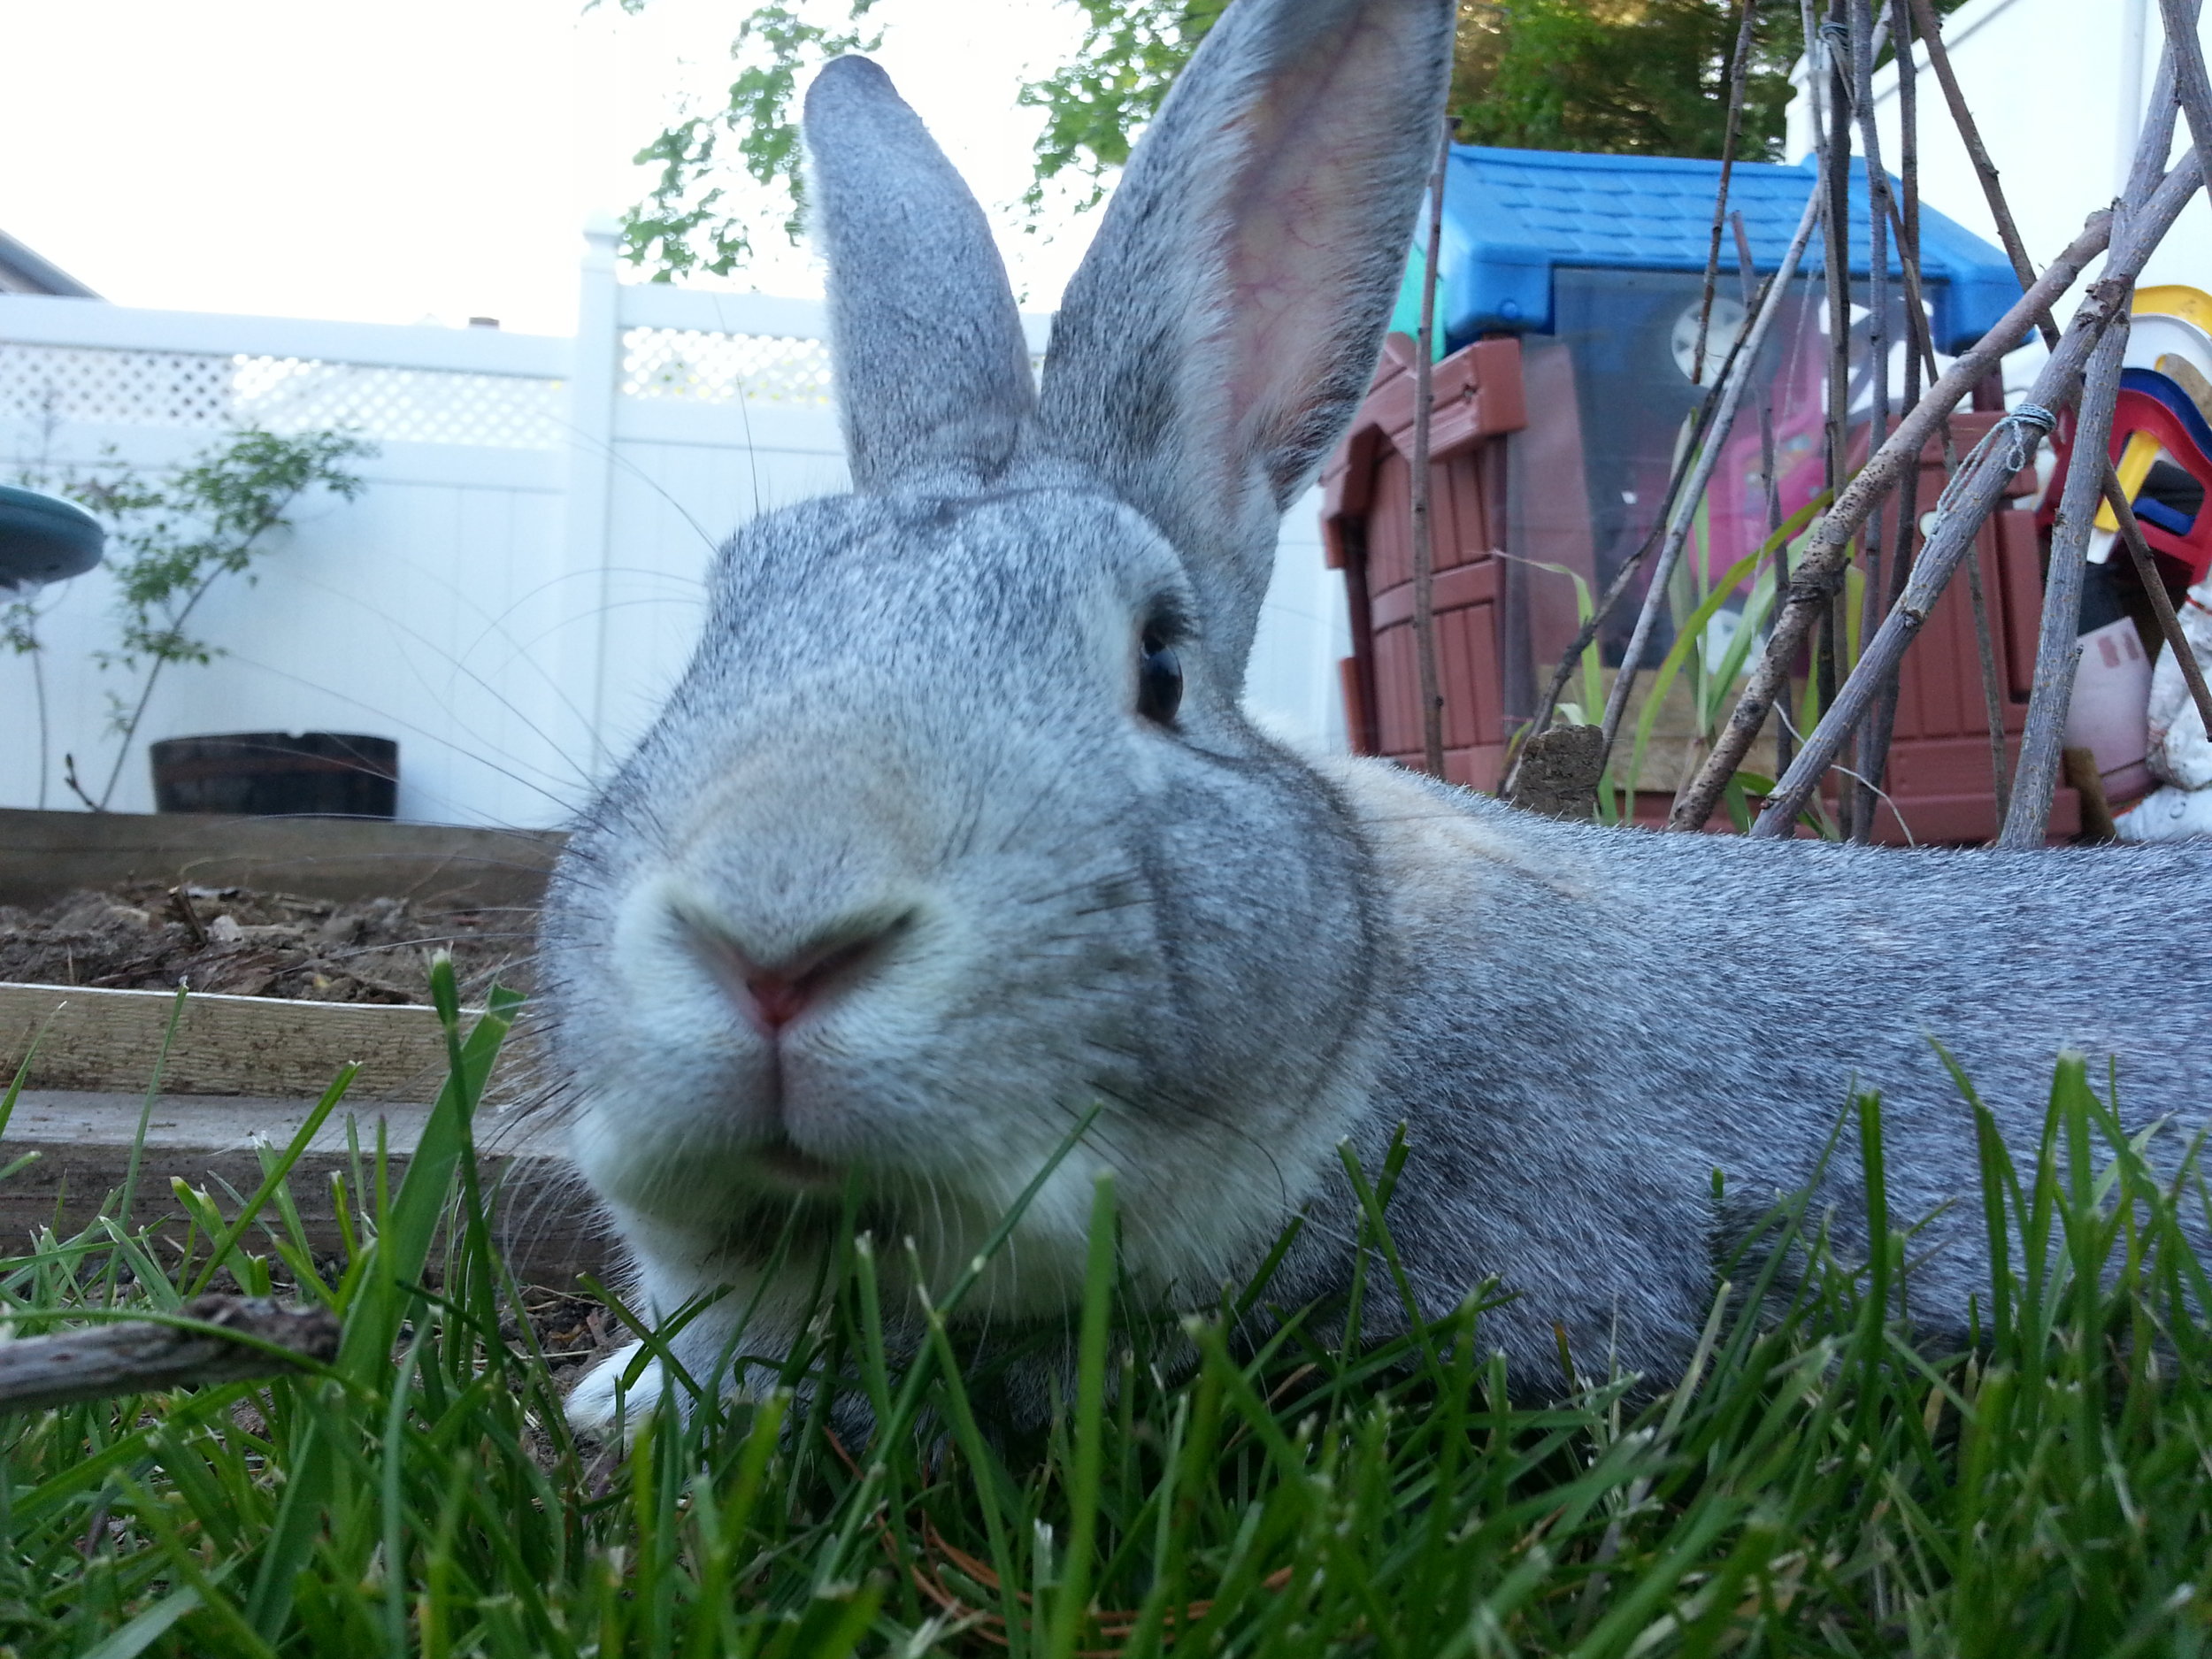 After a Brief Rest, Bunny Gets Back to Exploring the Backyard 2